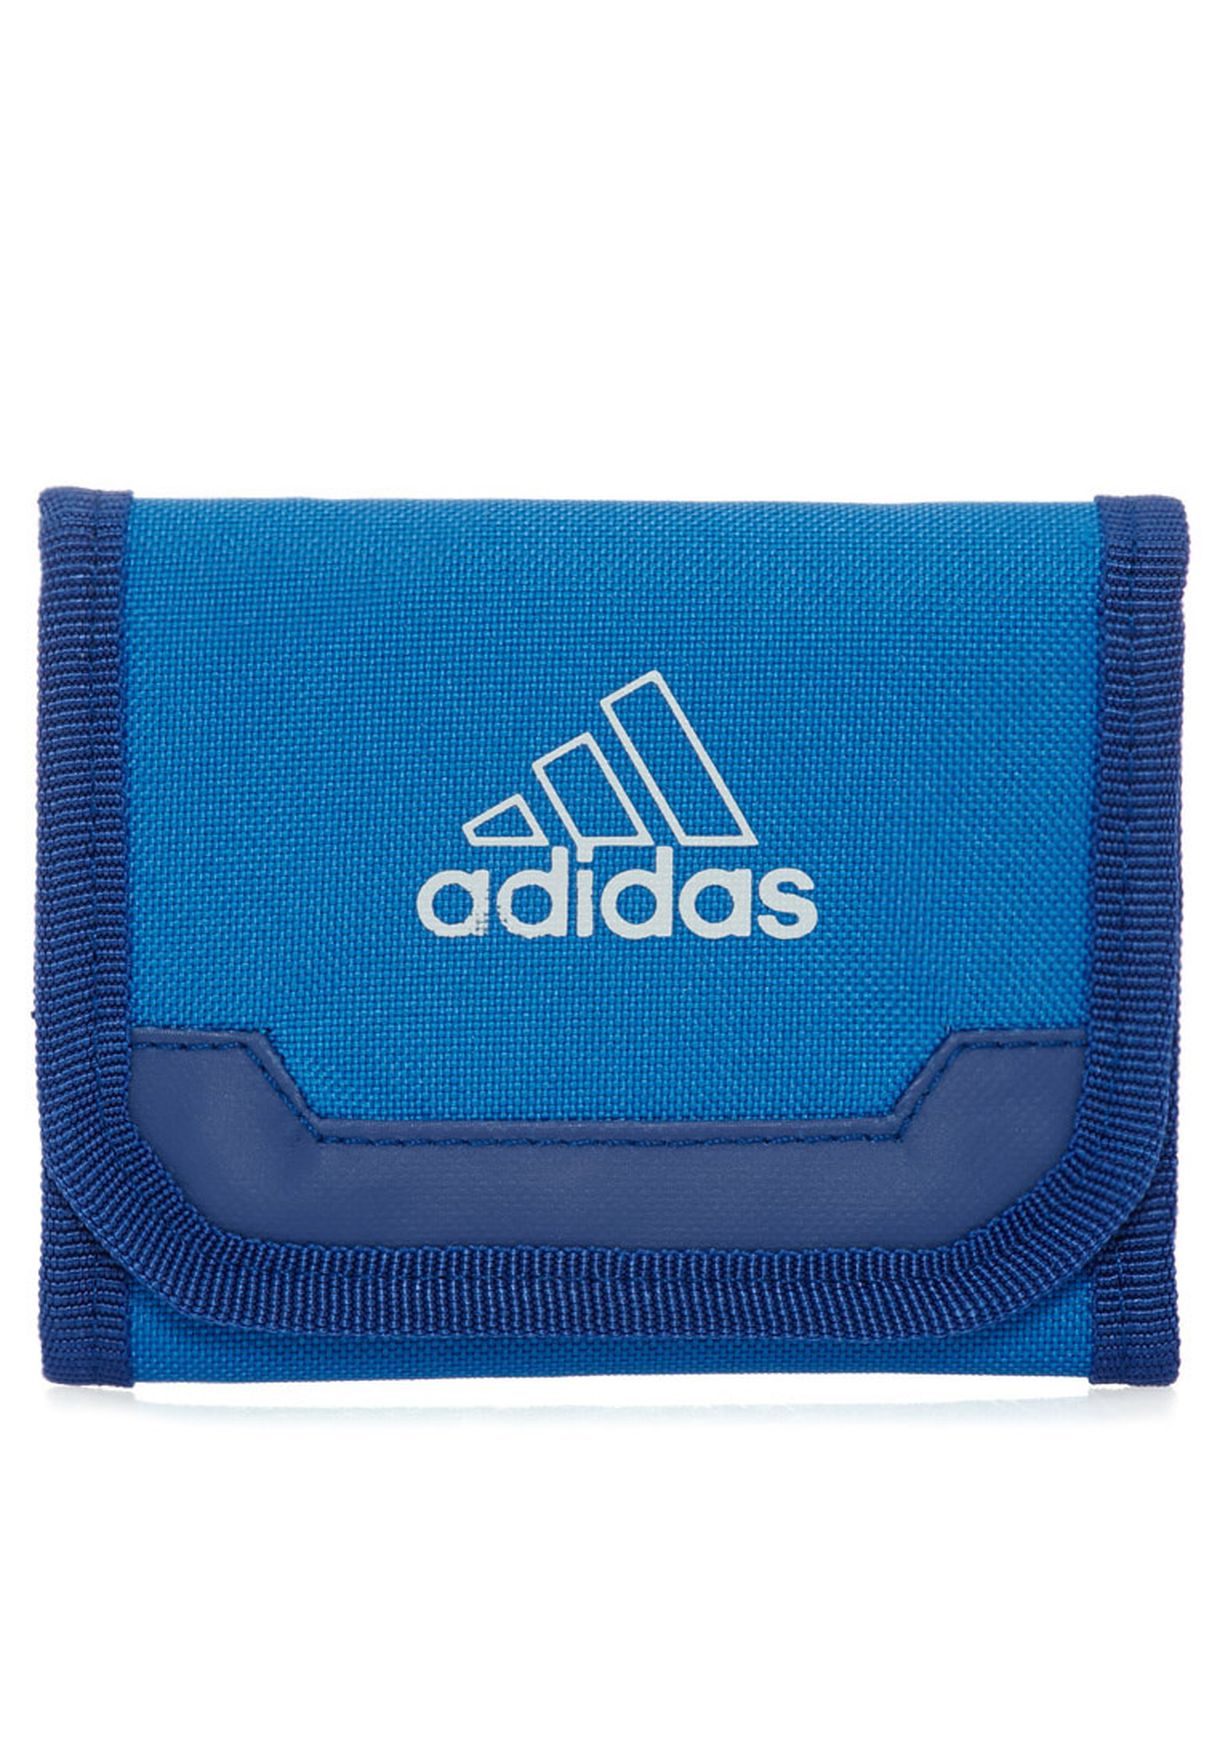 Buy adidas blue Perf Ess Wallet for Men in Manama, other cities | Z31782